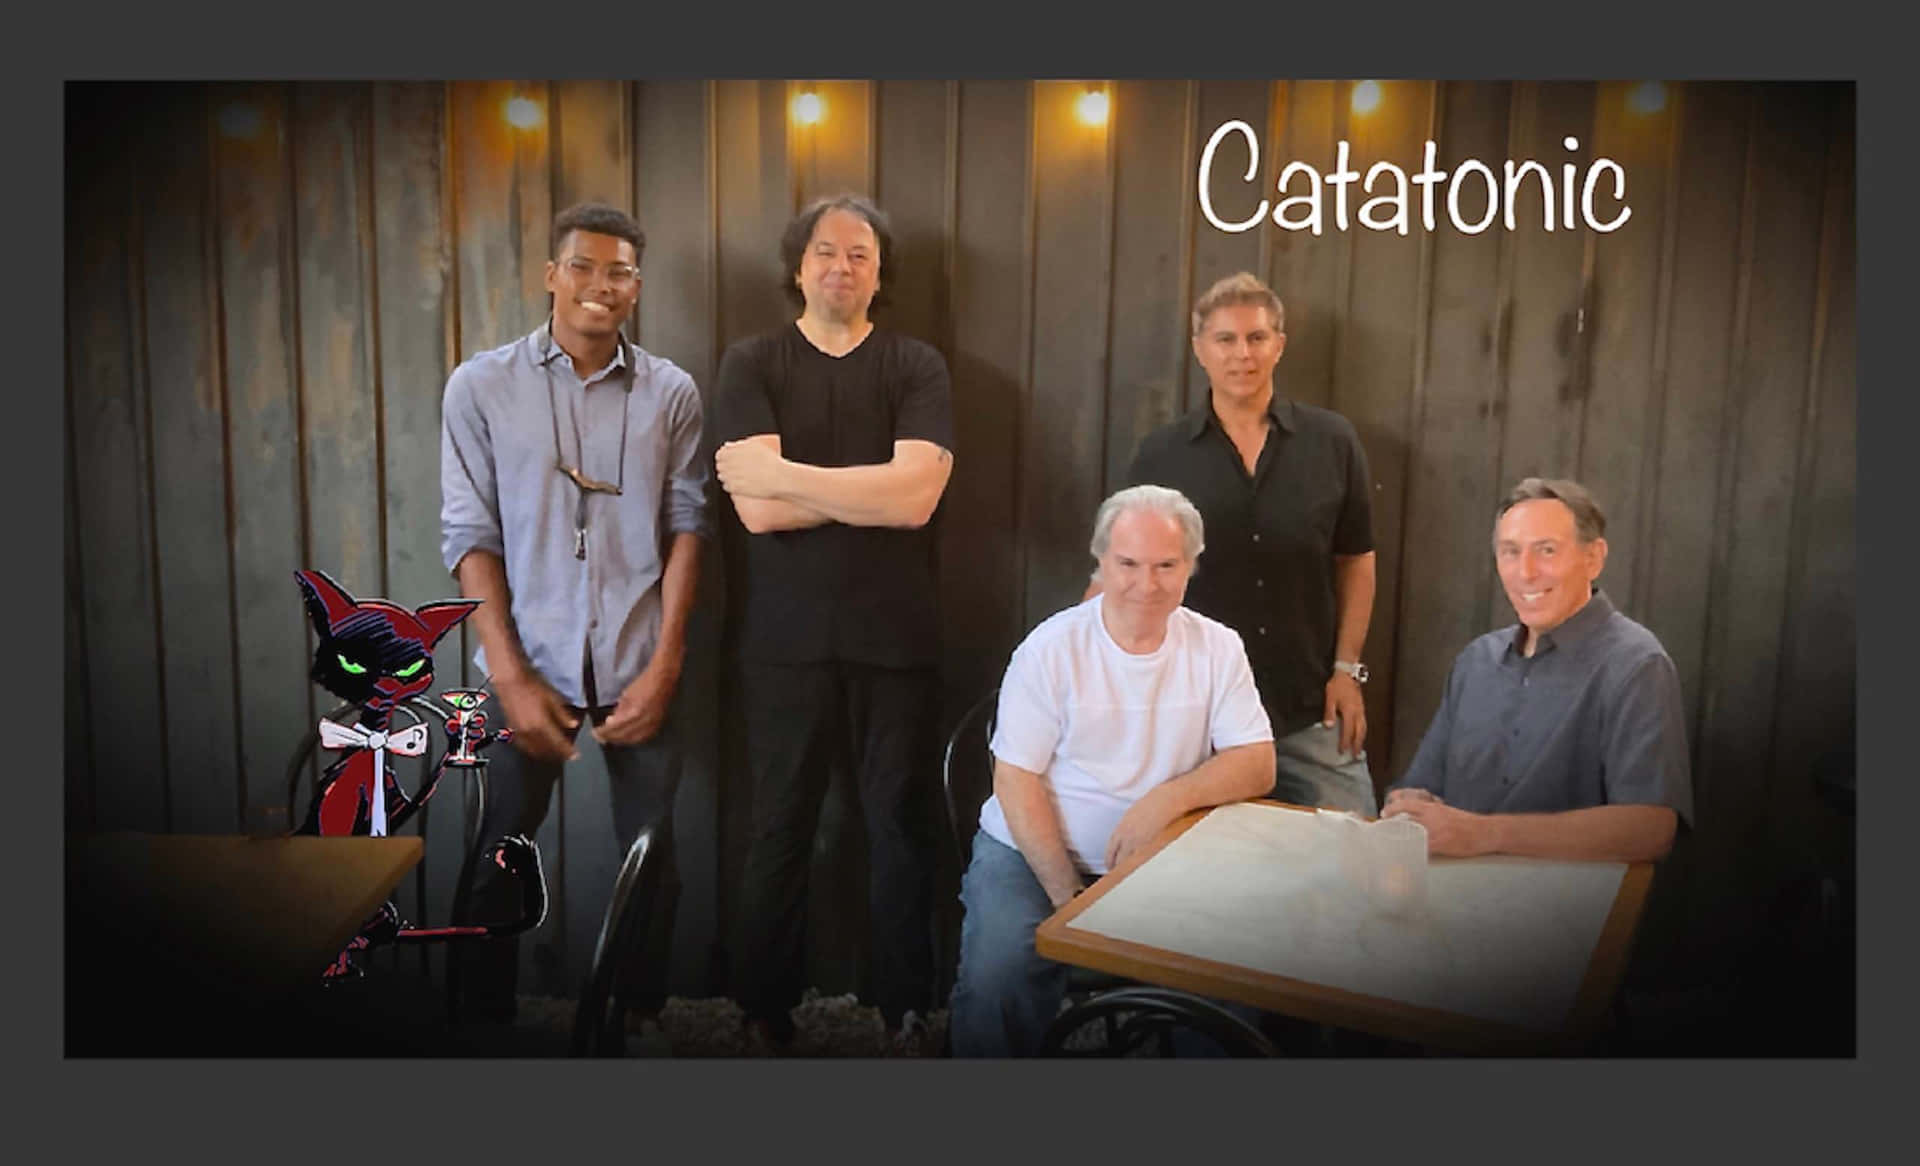 Catatonic - A Group Of Men Standing In Front Of A Table